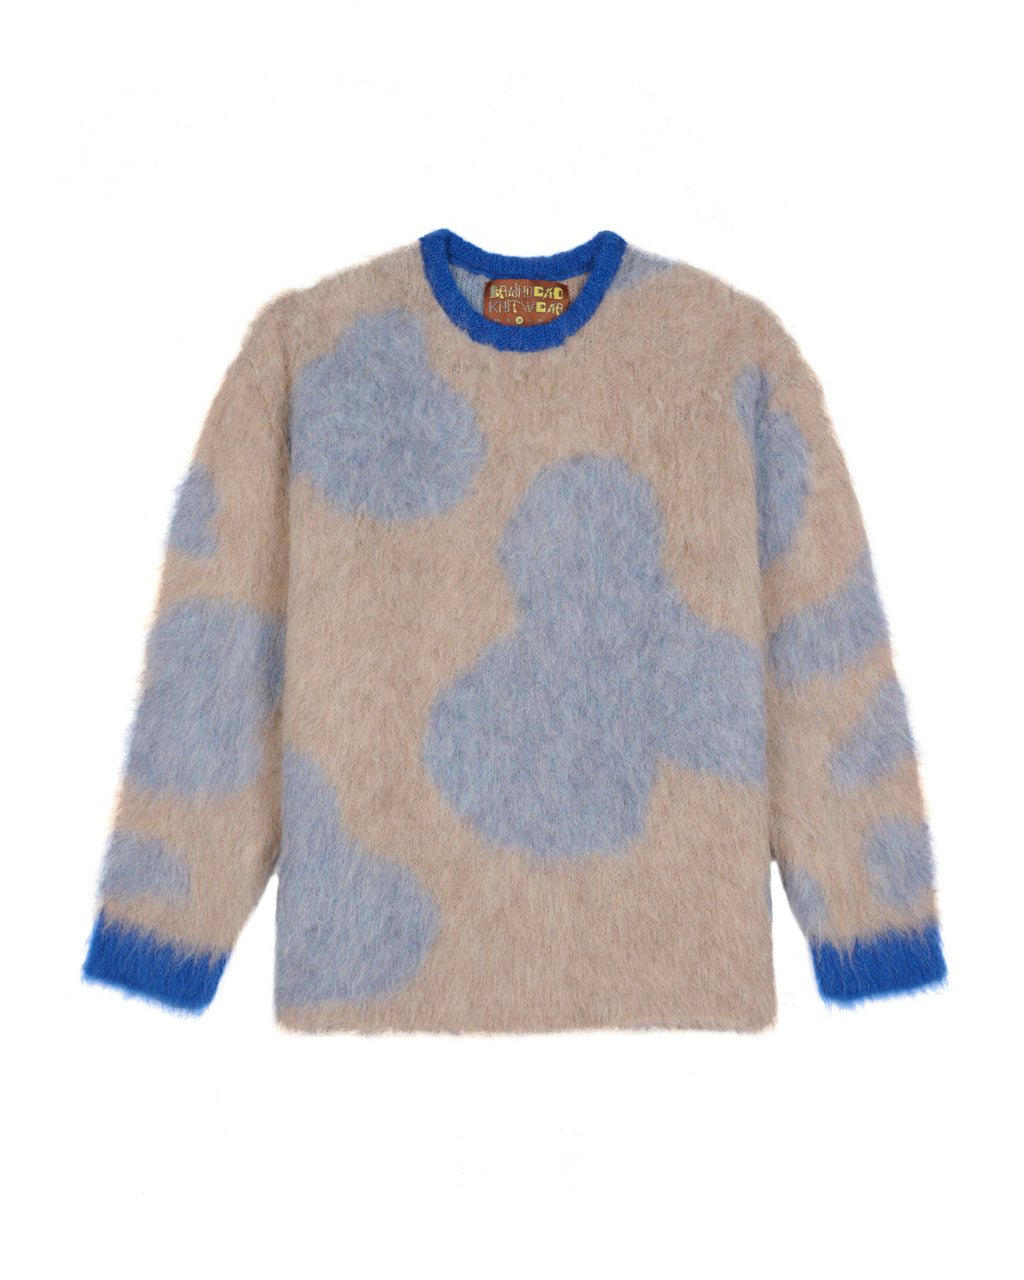 Boxy Knit Cow Print Sweater - Taupe